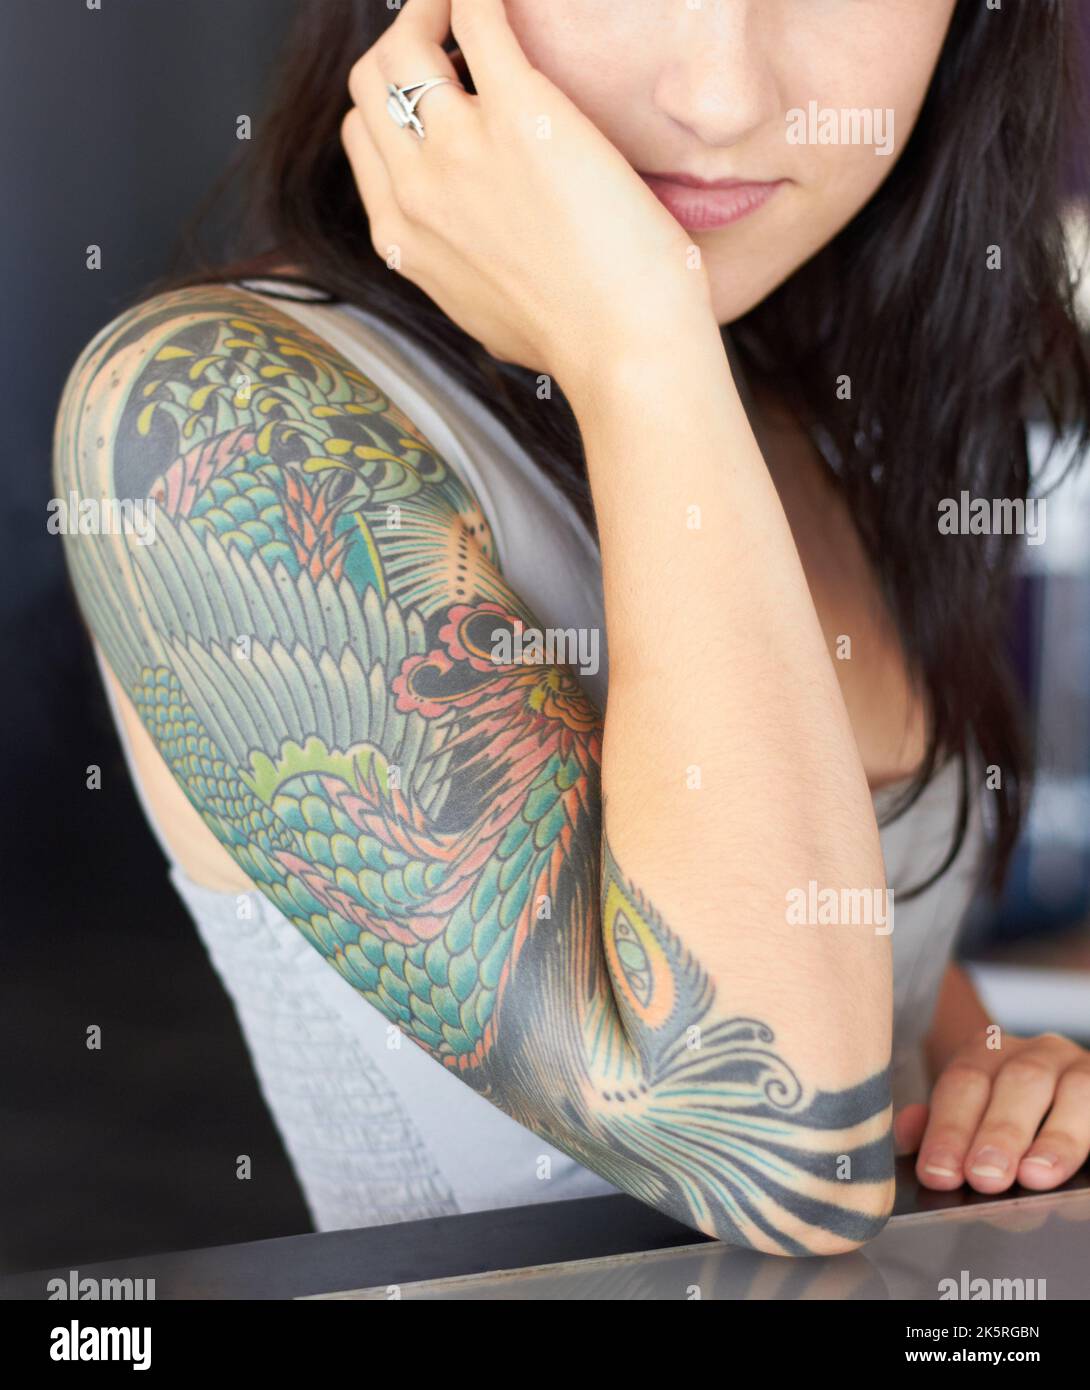 Proud to display living artwork. a young tattoo artist showing off her half-sleeve tattoo. Stock Photo